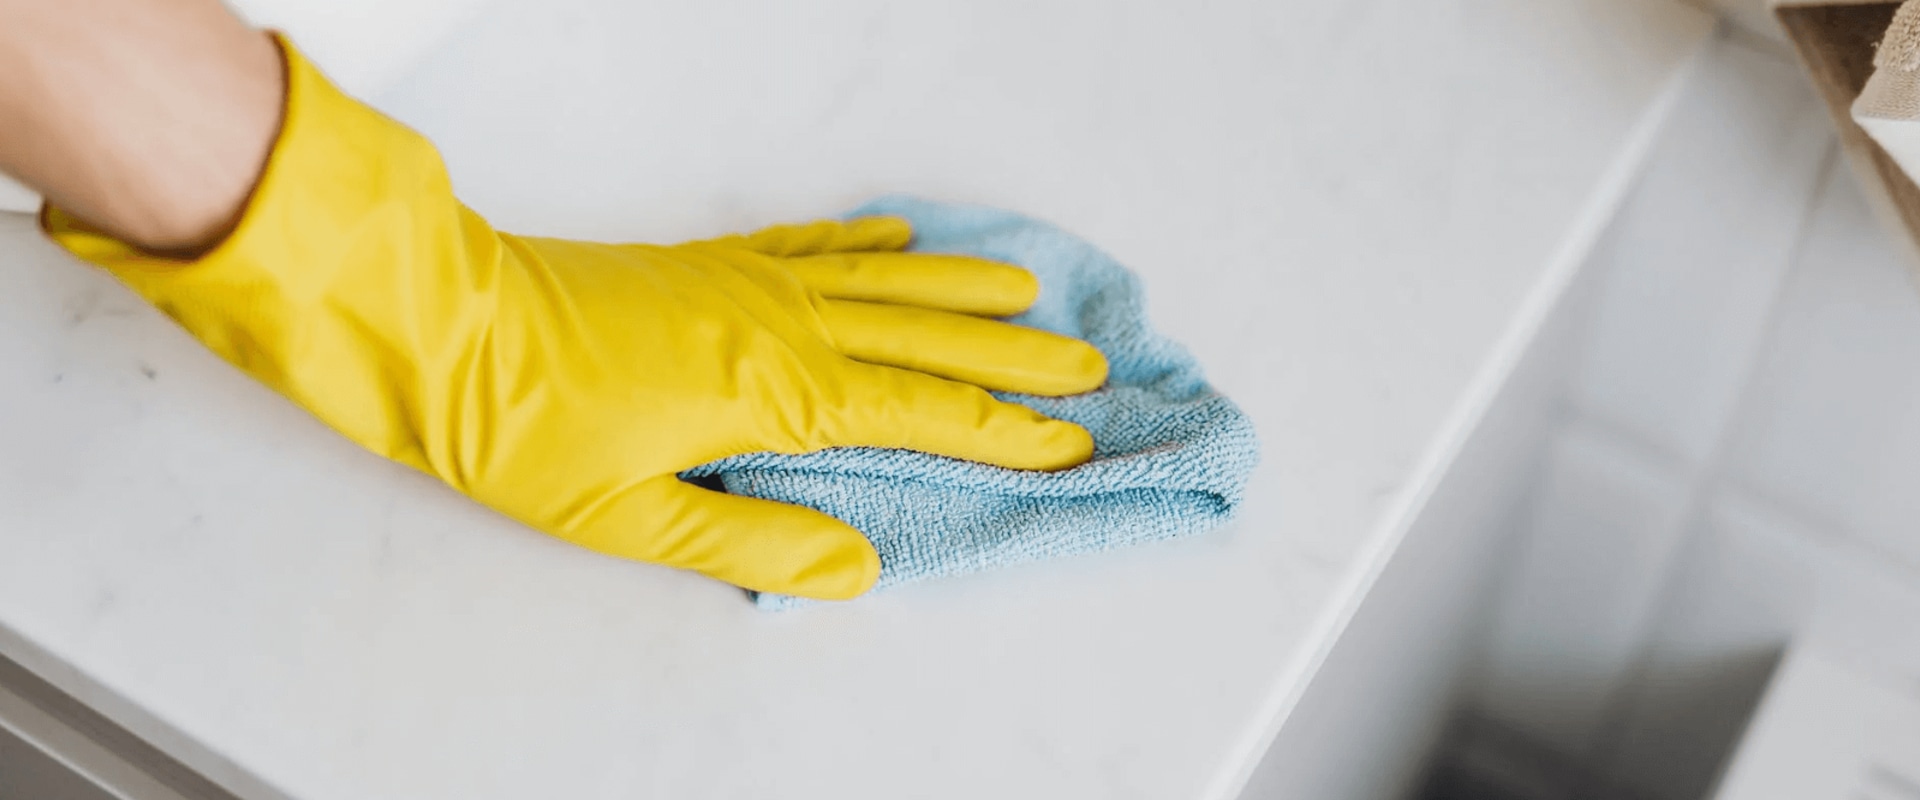 What does janitorial cleaning mean?